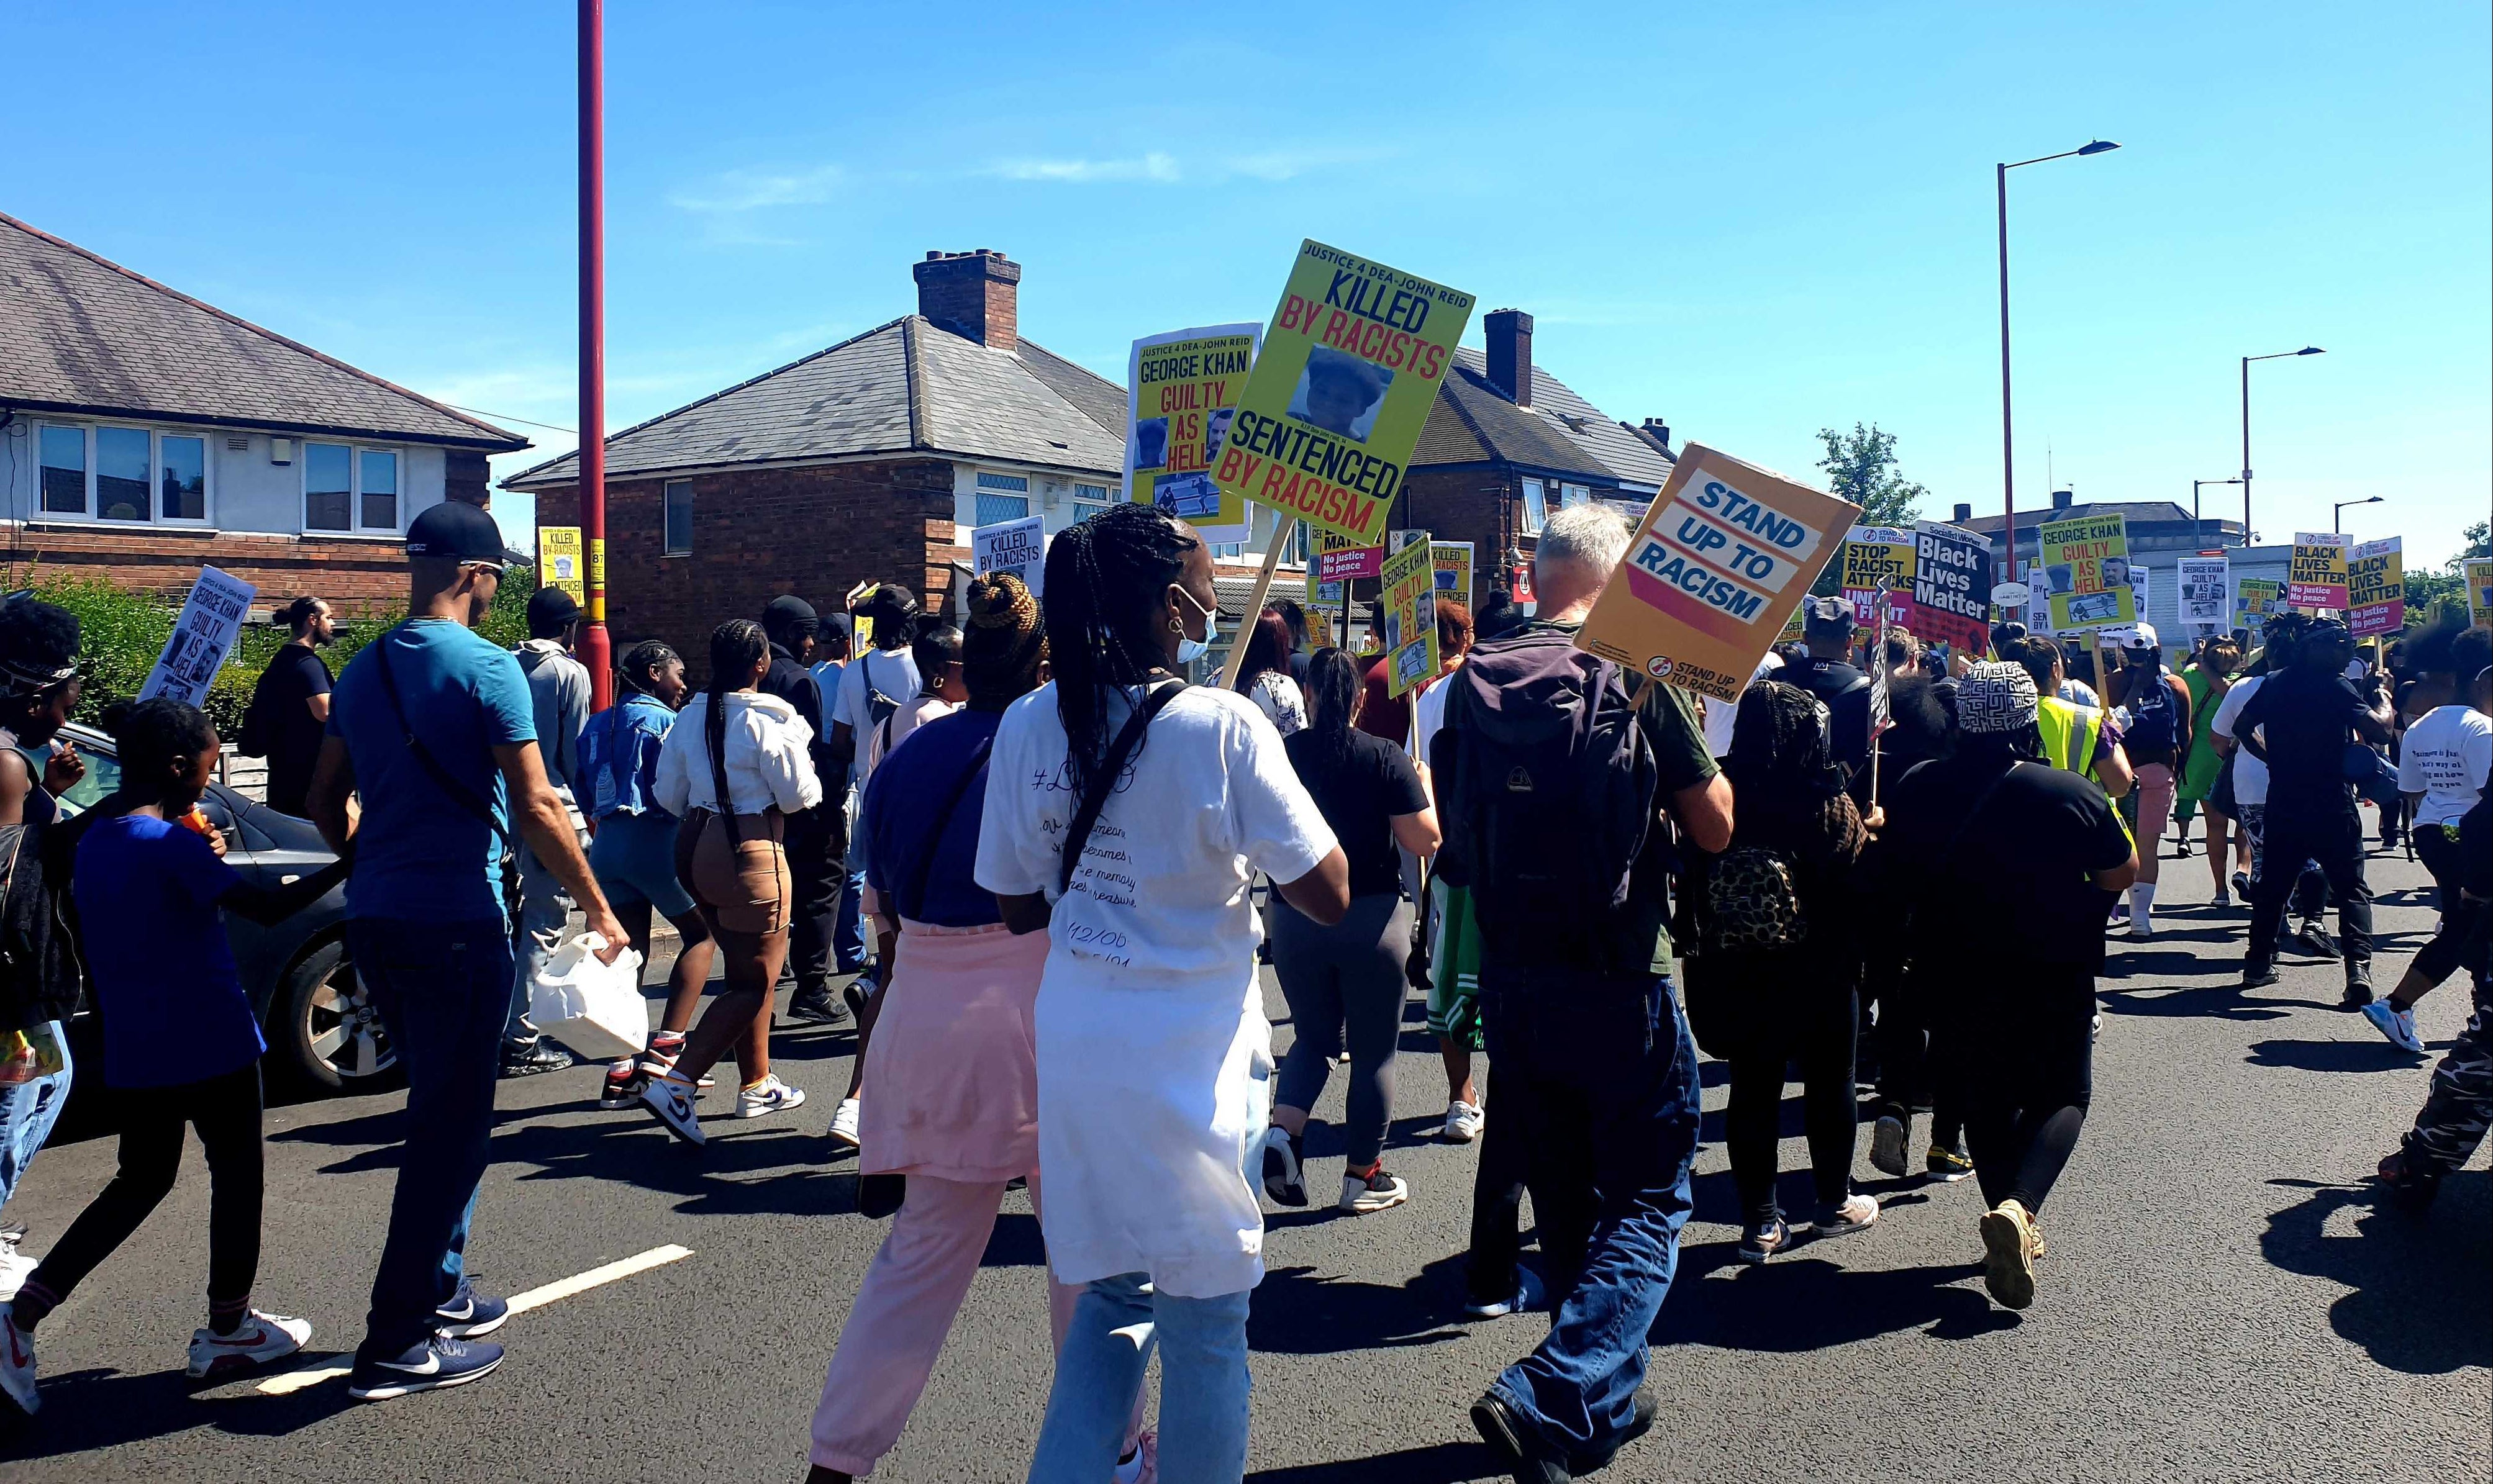 Dea-John Reid Hundreds march in Birmingham after Black teenager stabbed to death The Independent pic